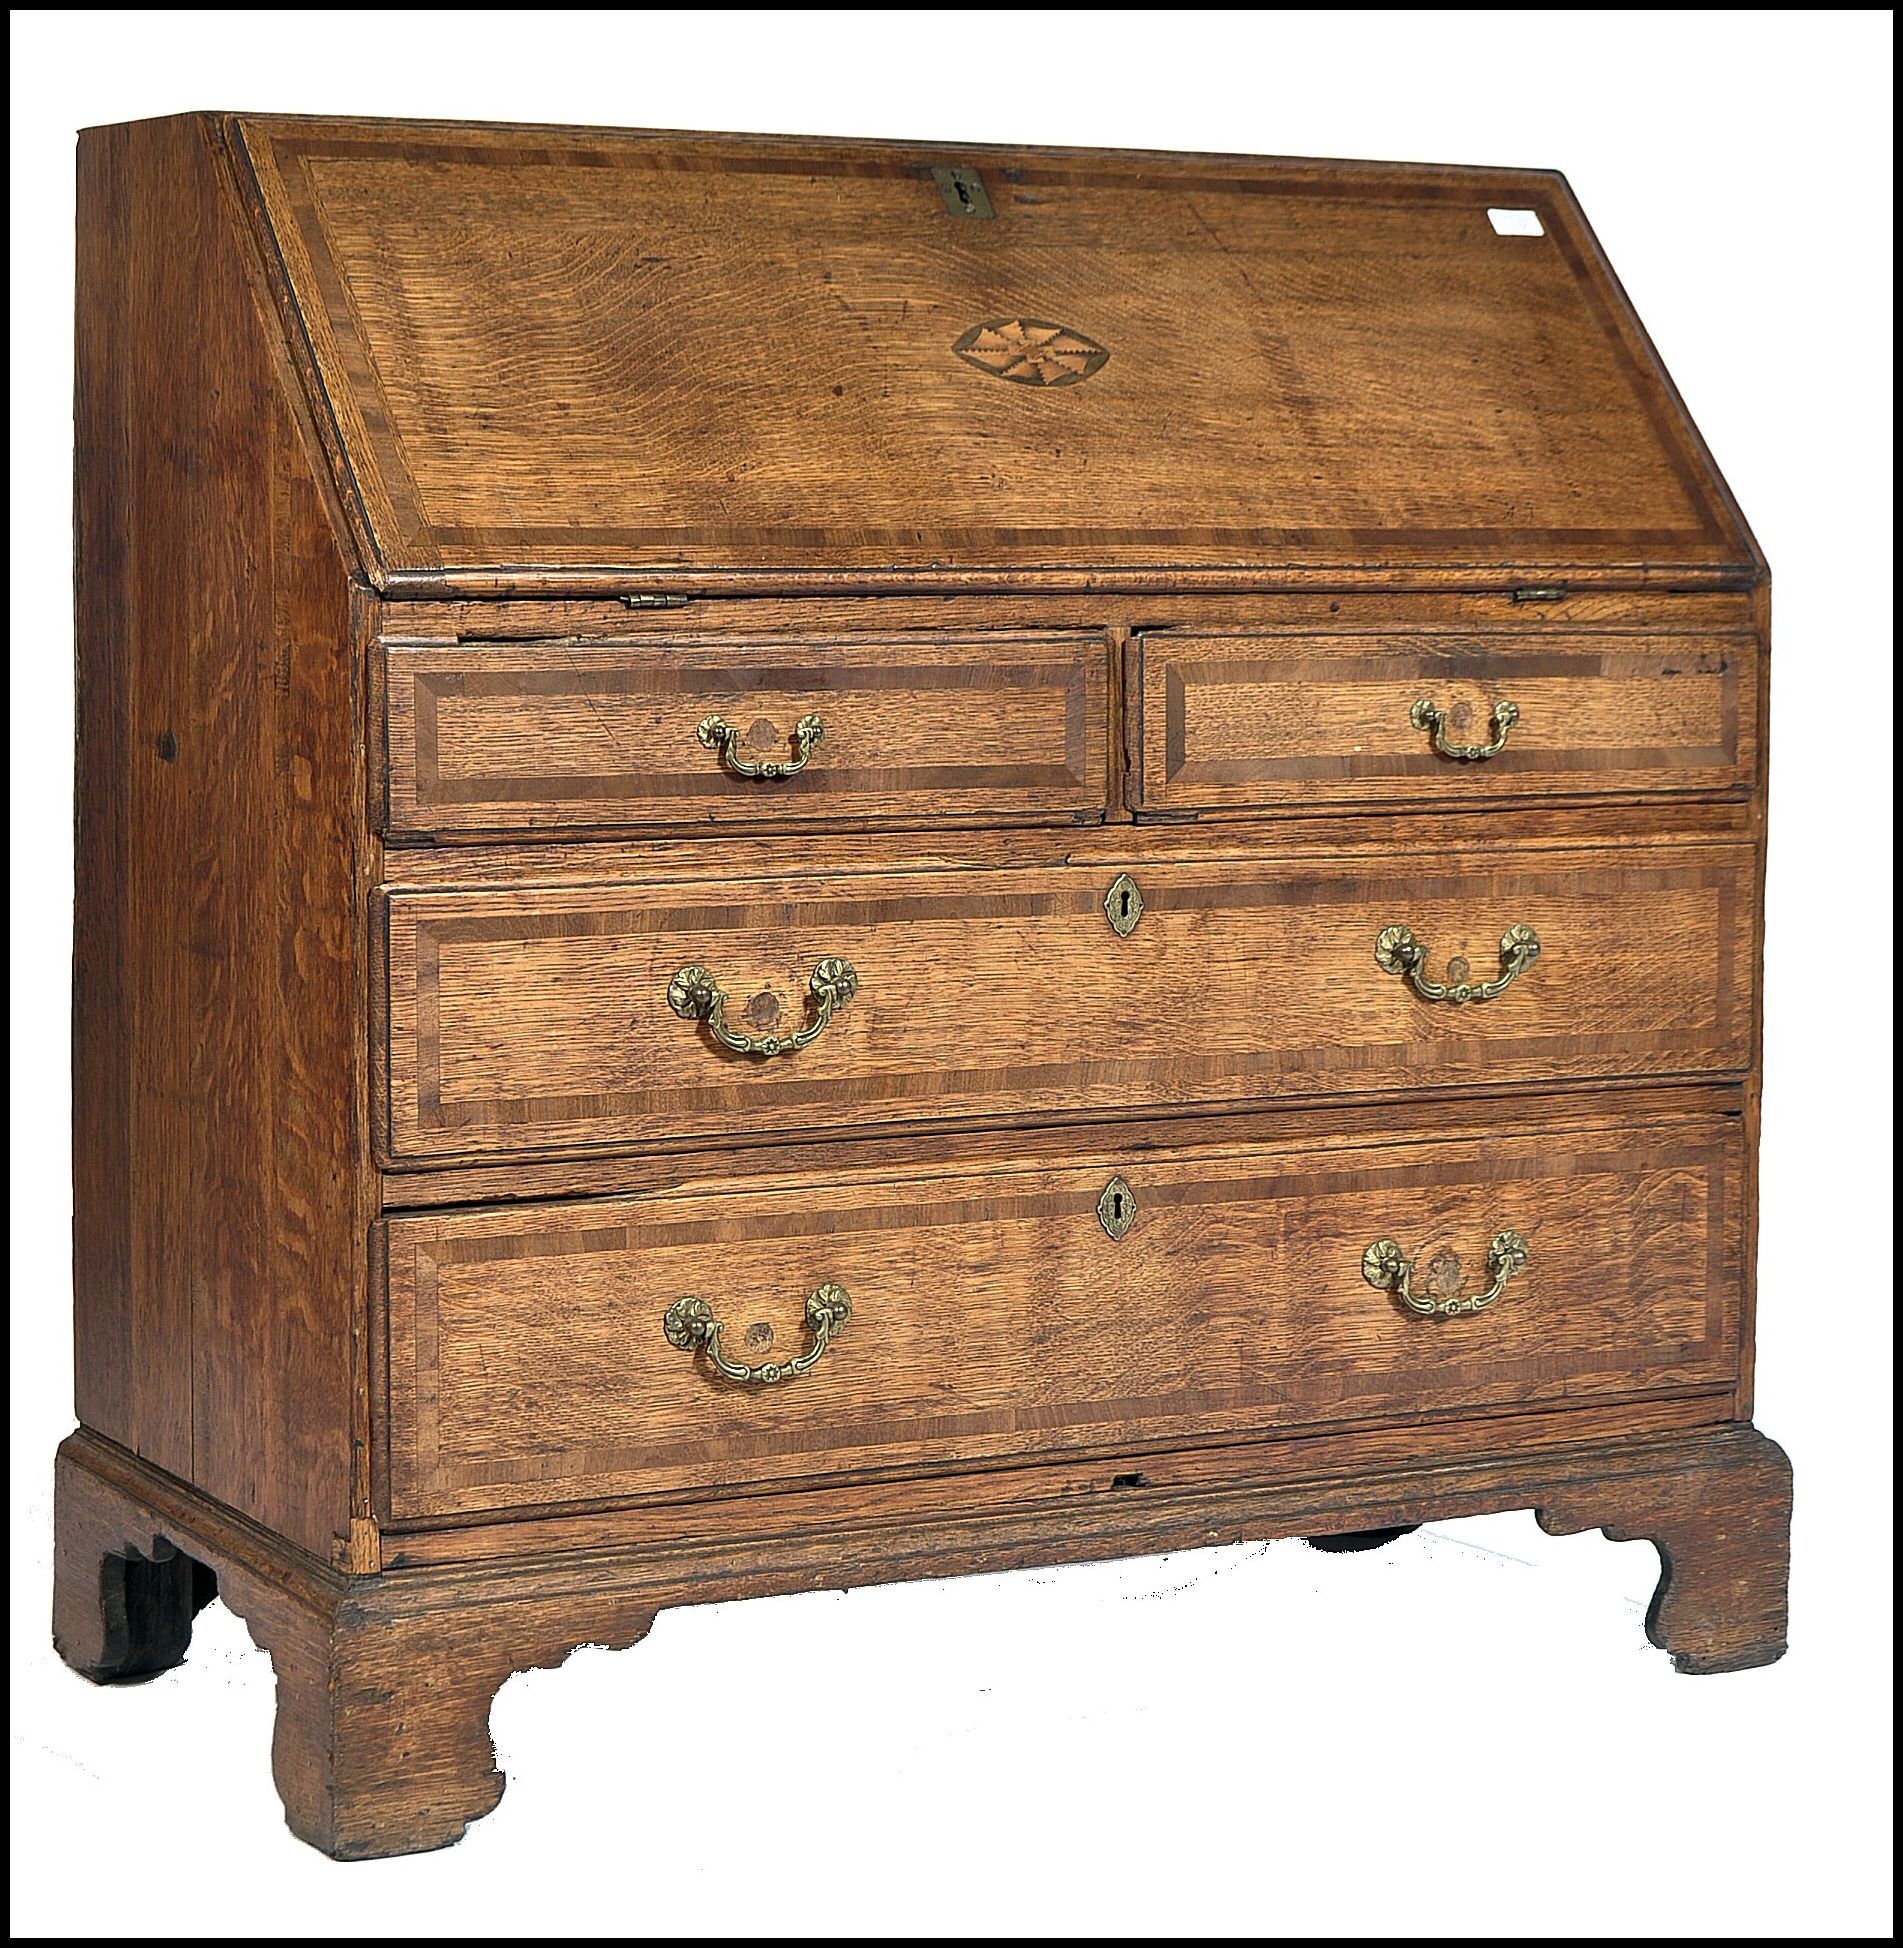 An 18th century North Country Lancashire bureau desk. Raised on bracket feet with a series of